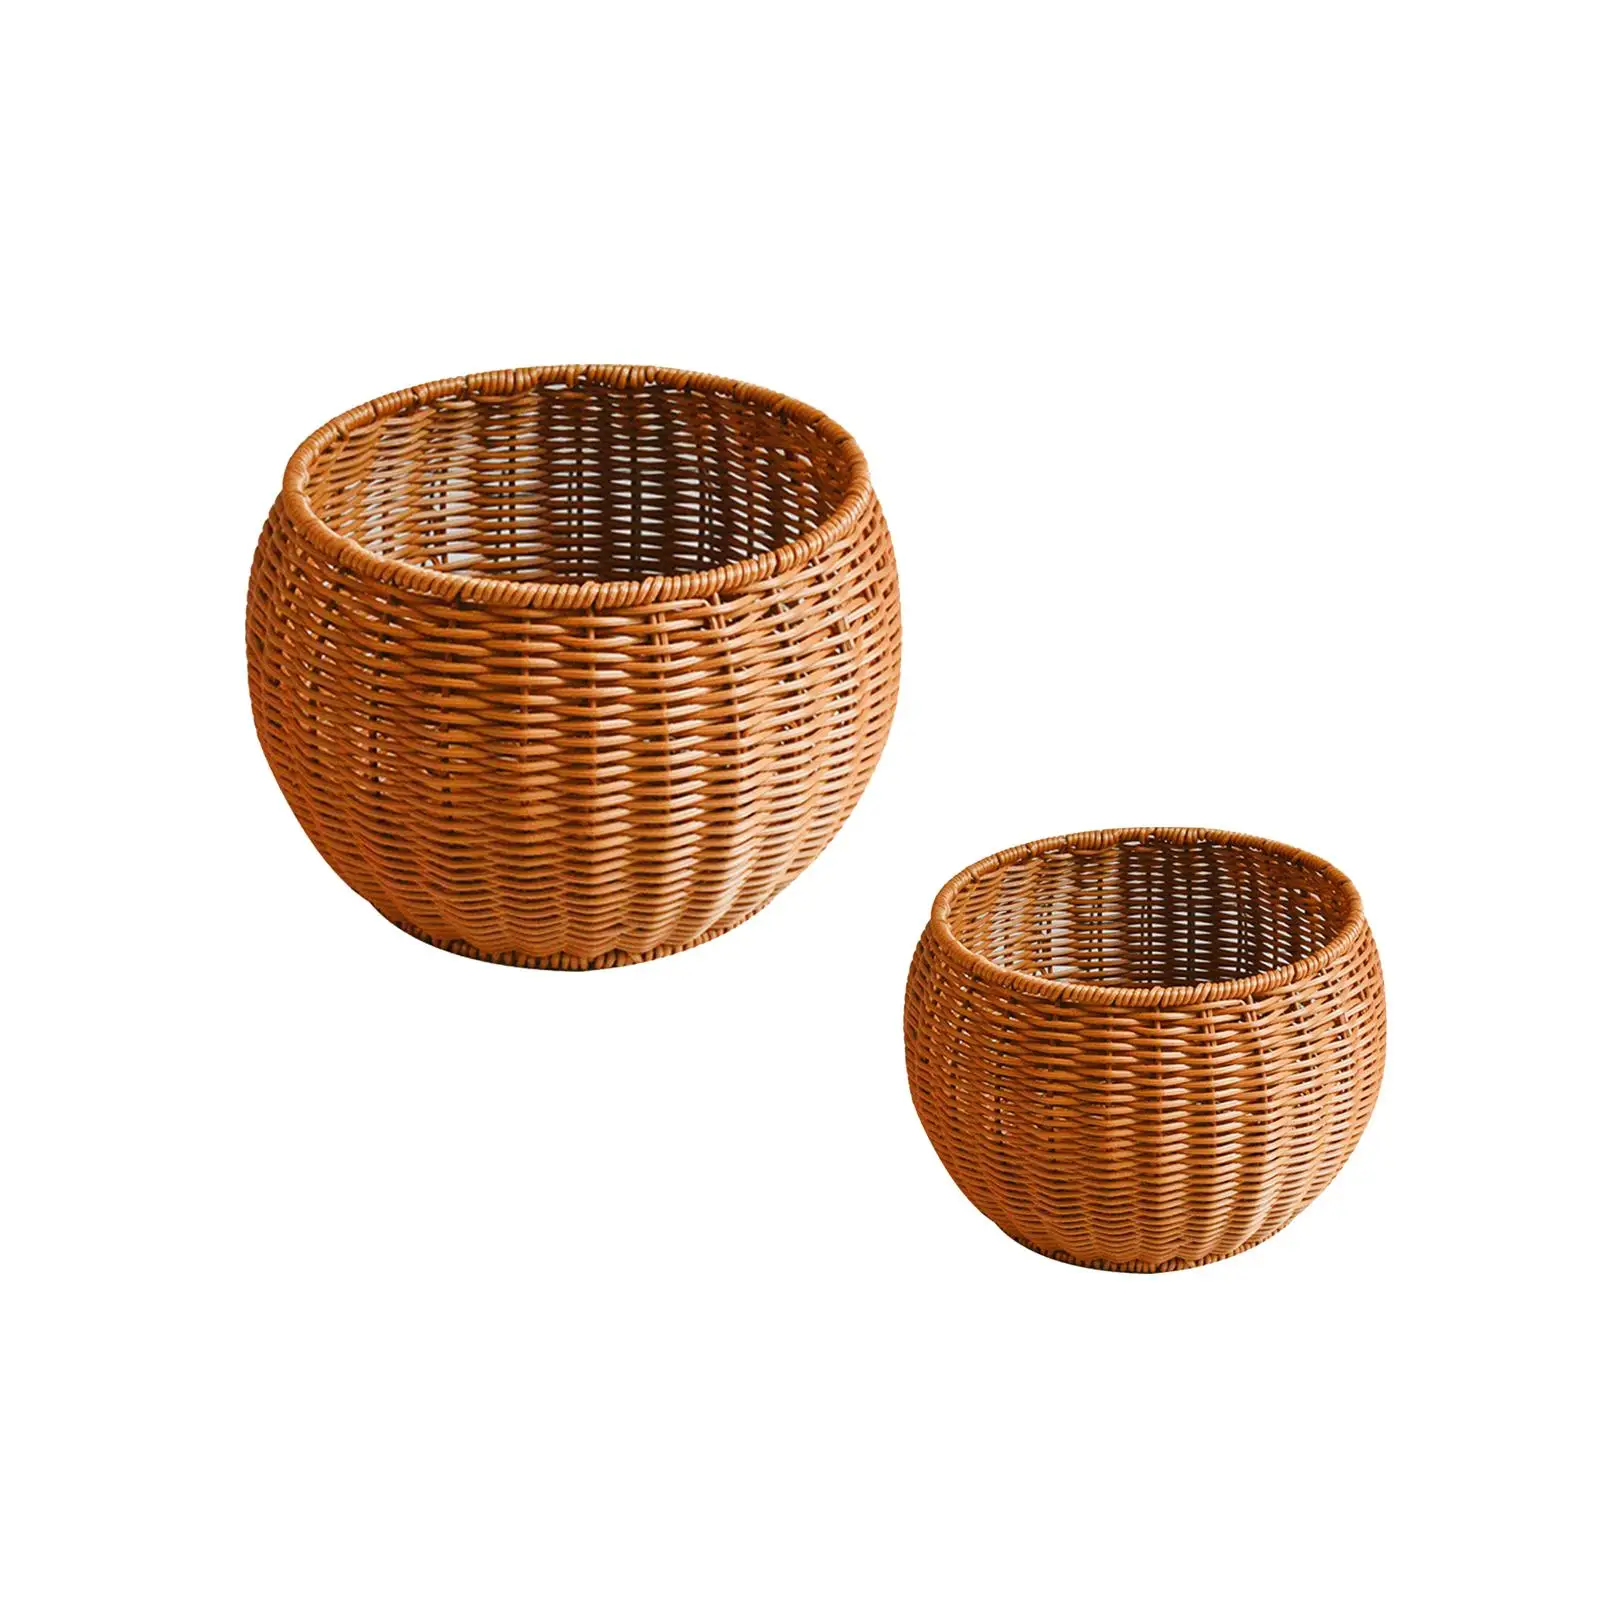 Imitation Rattan Tableware Tray Round Picnic Basket Woven Bread Baskets for Cabinet Countertops Shelves Cabinets Napkins